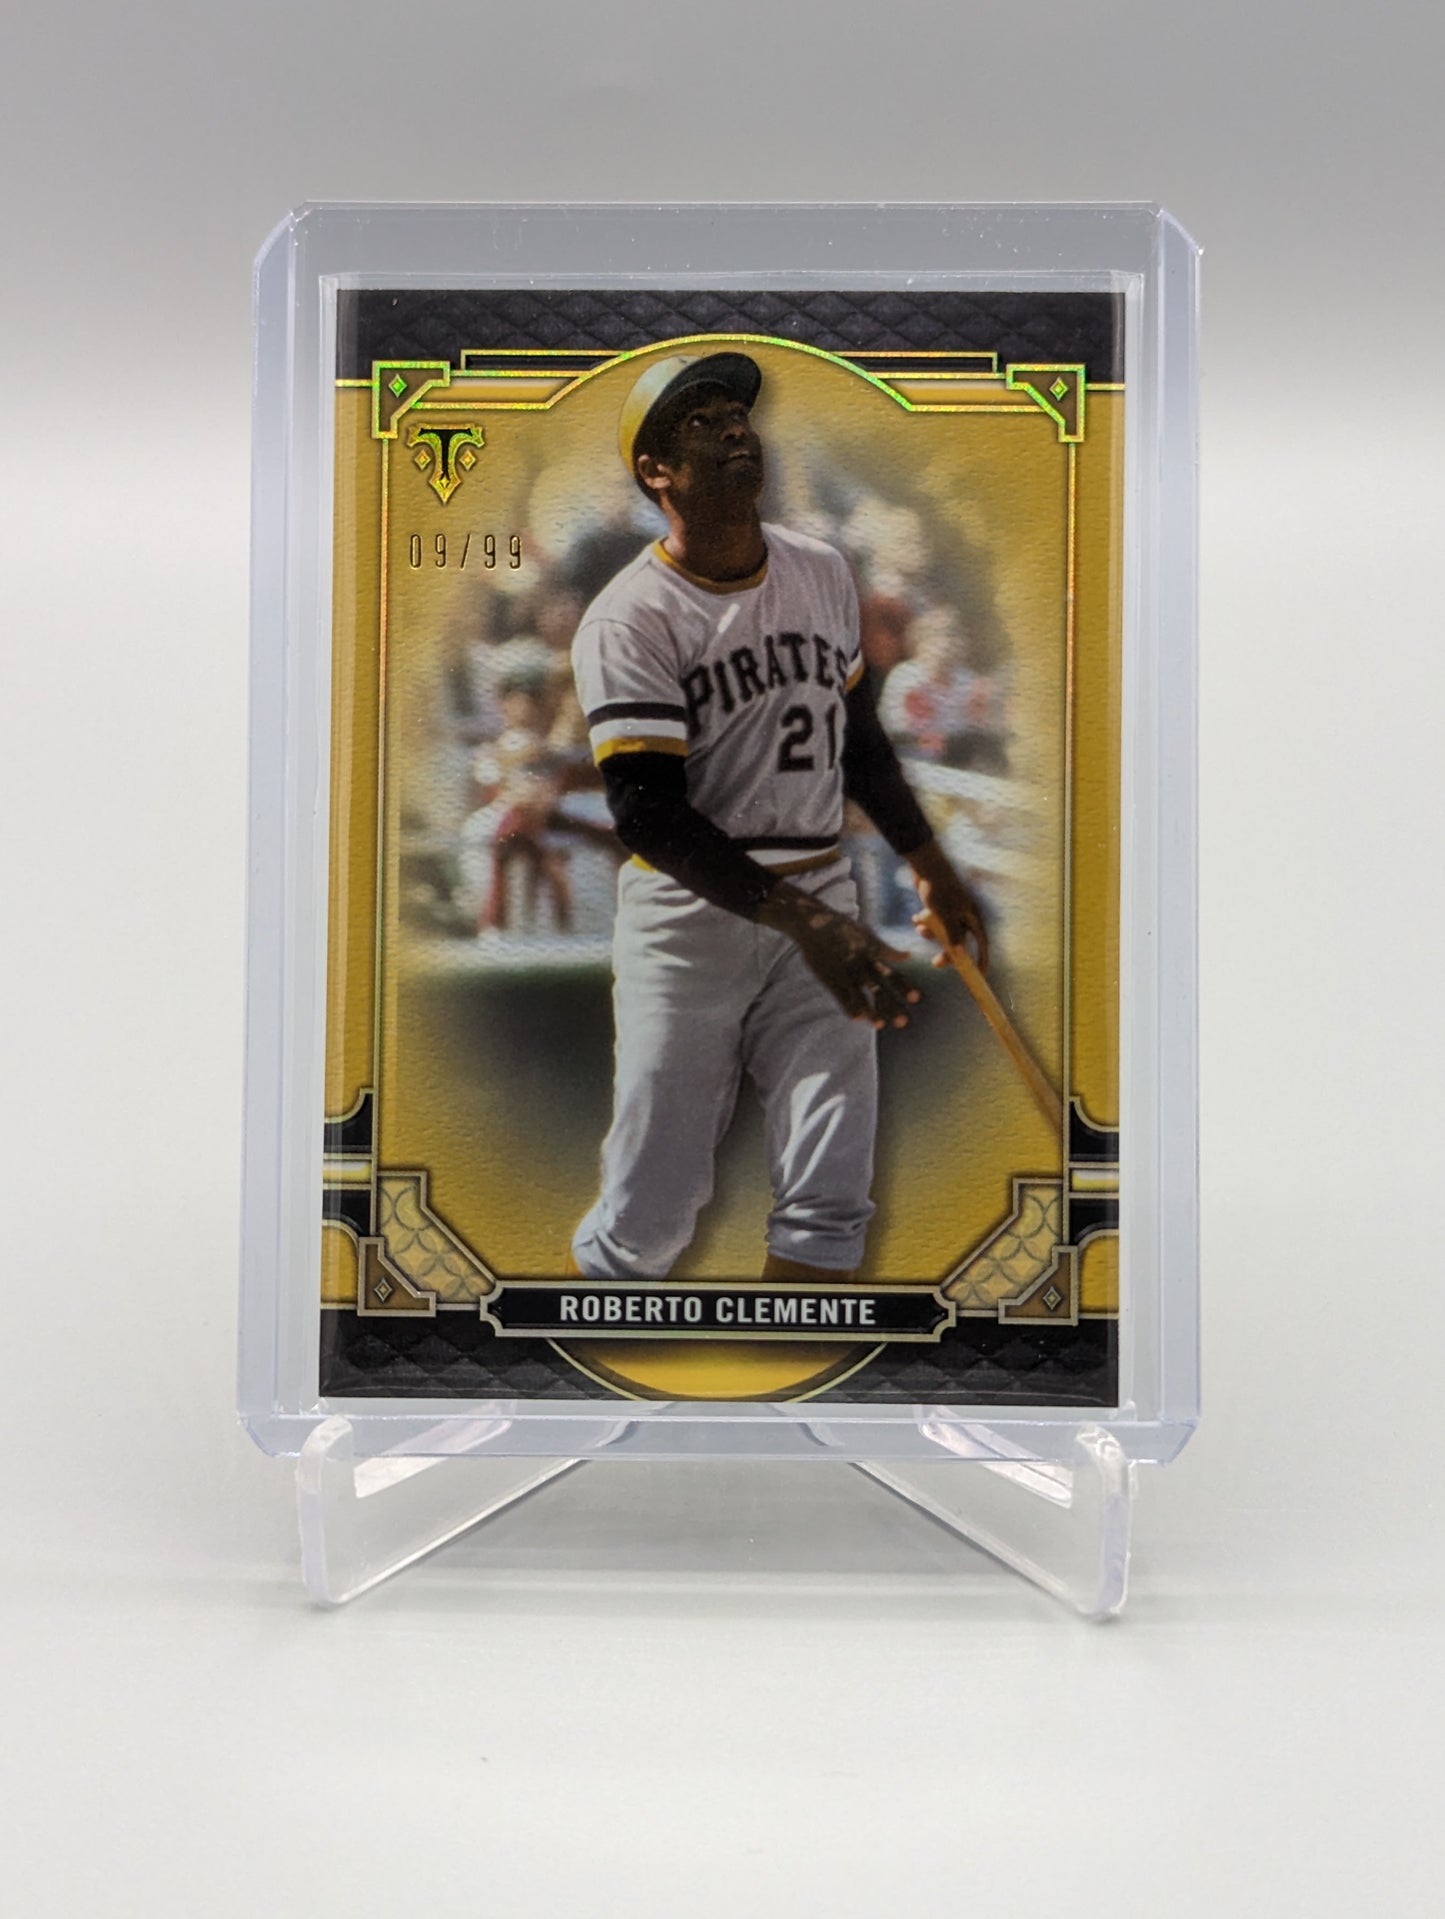 2022 Topps Triple Threads Gold #89 Roberto Clemente #/99 Pirates